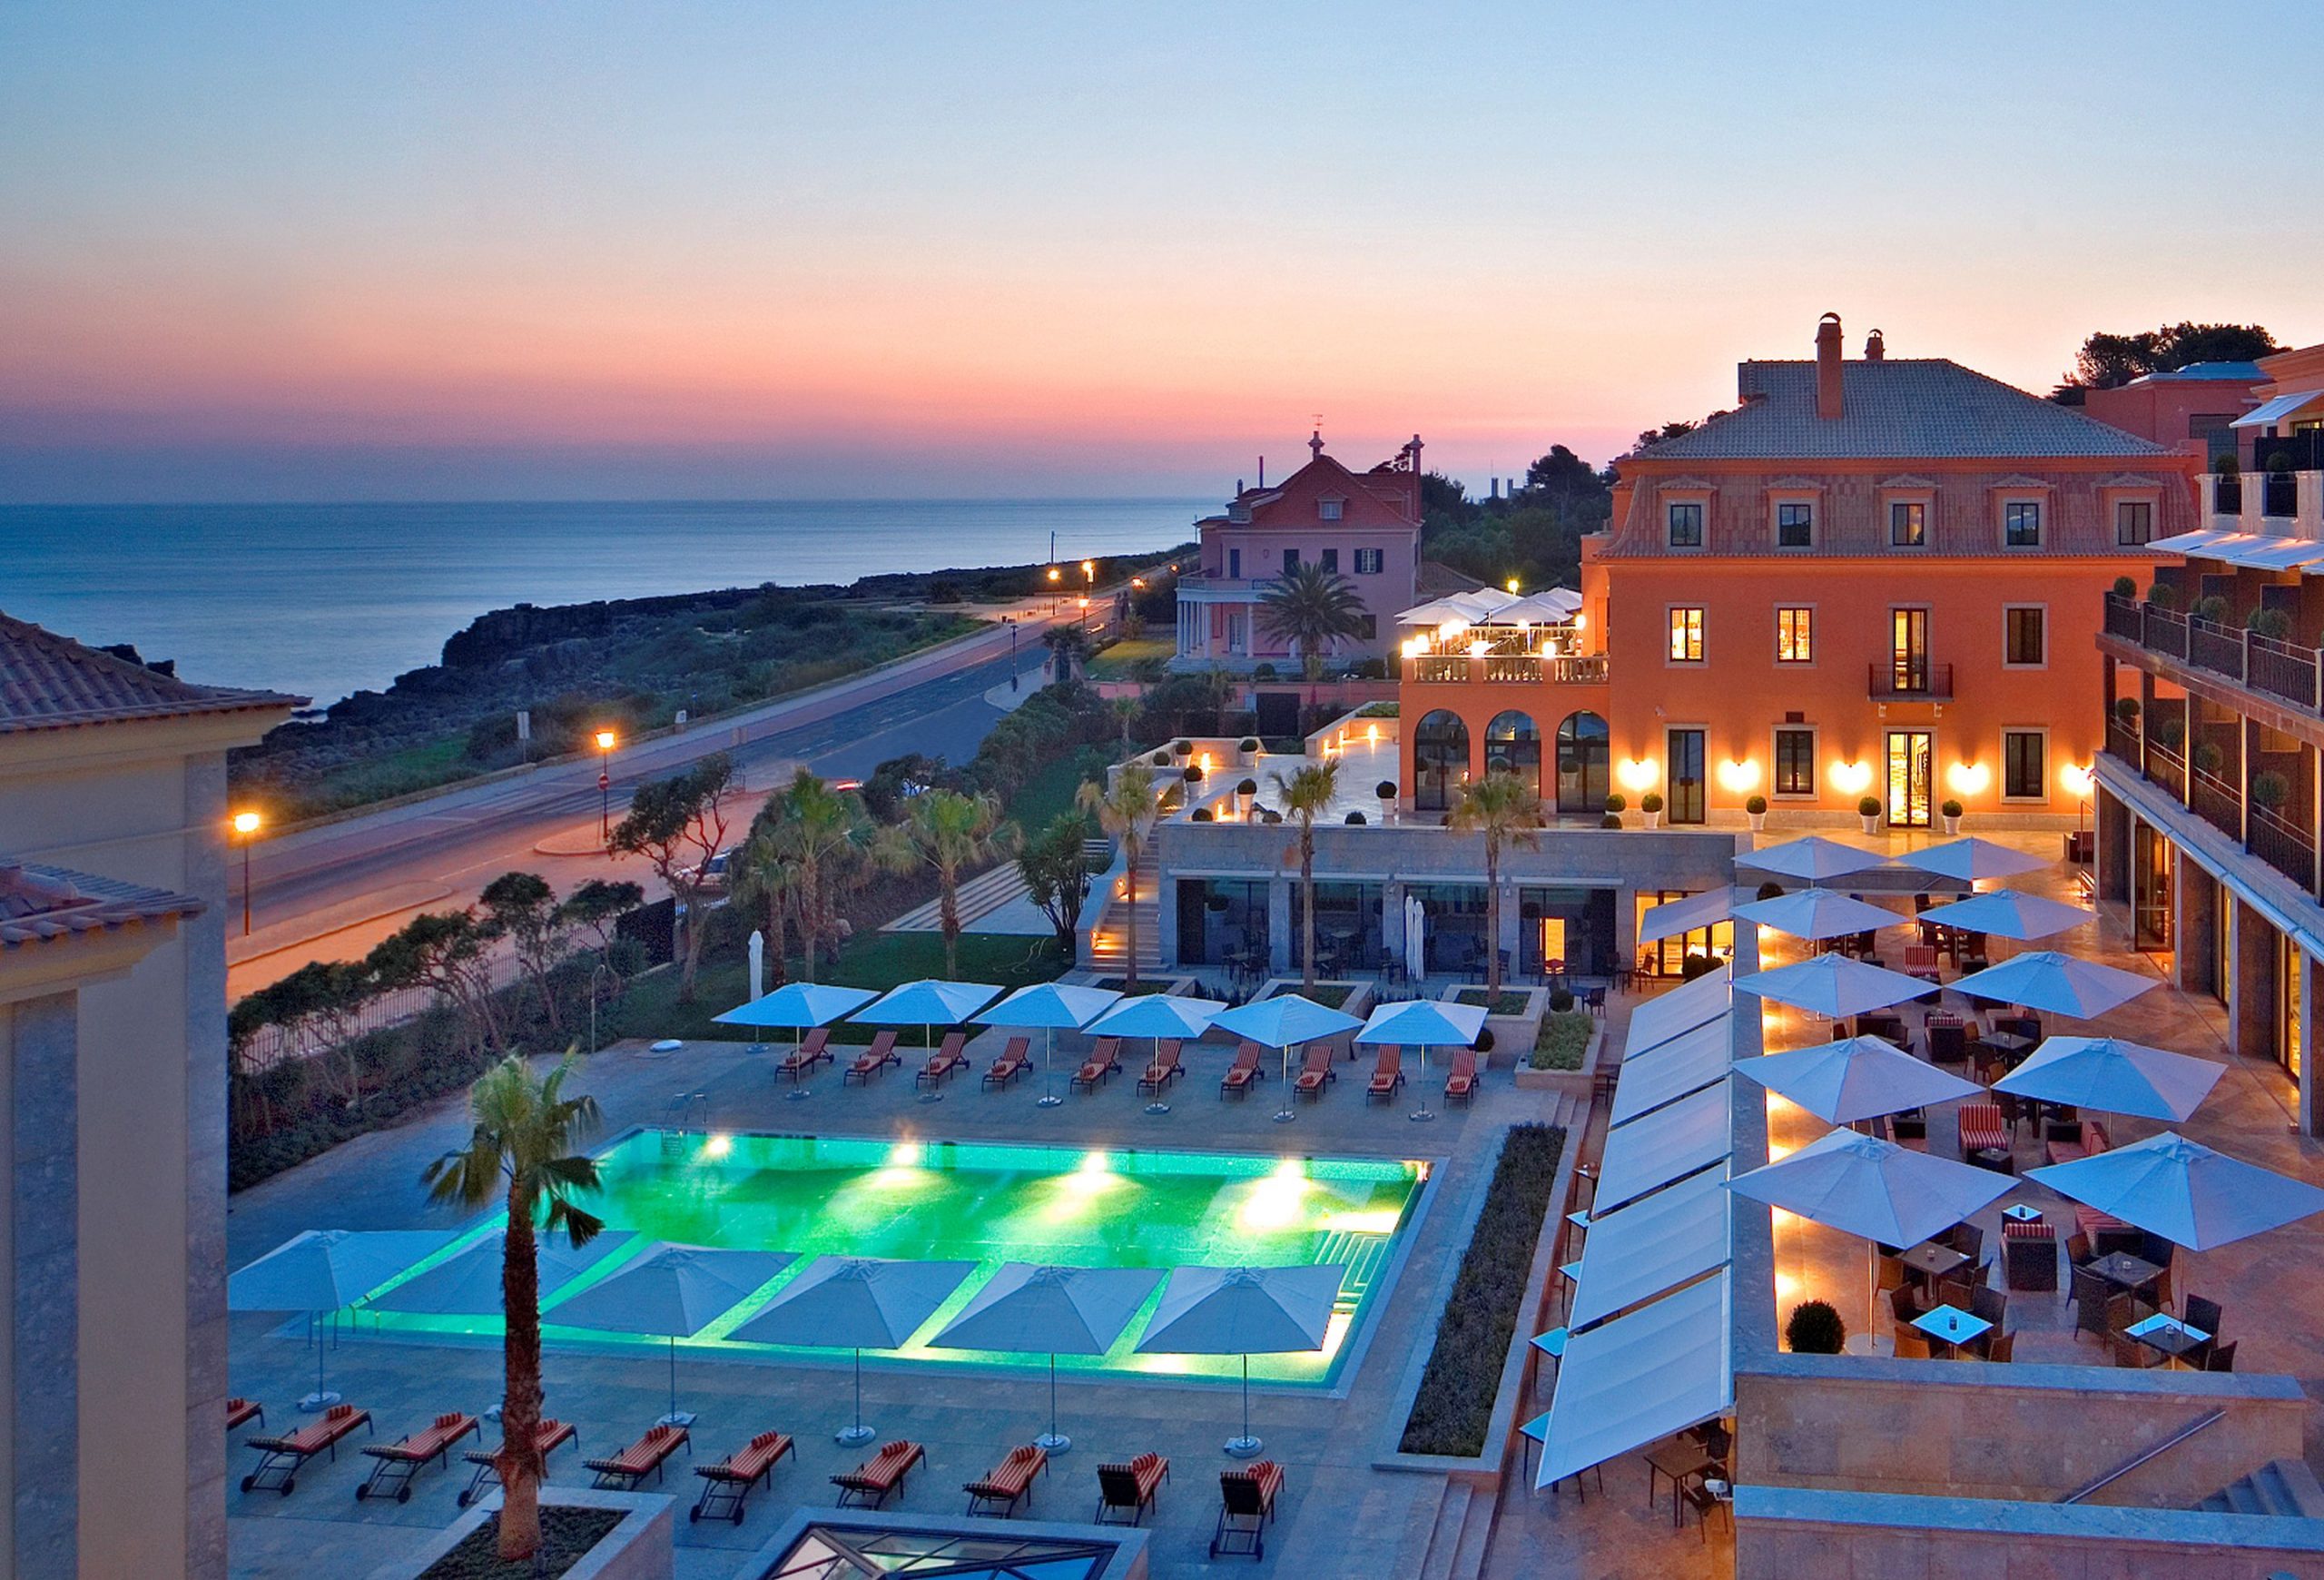 The Grande Real Villa Italia Hotel, Cascais, Portugal, lit up at sunset.